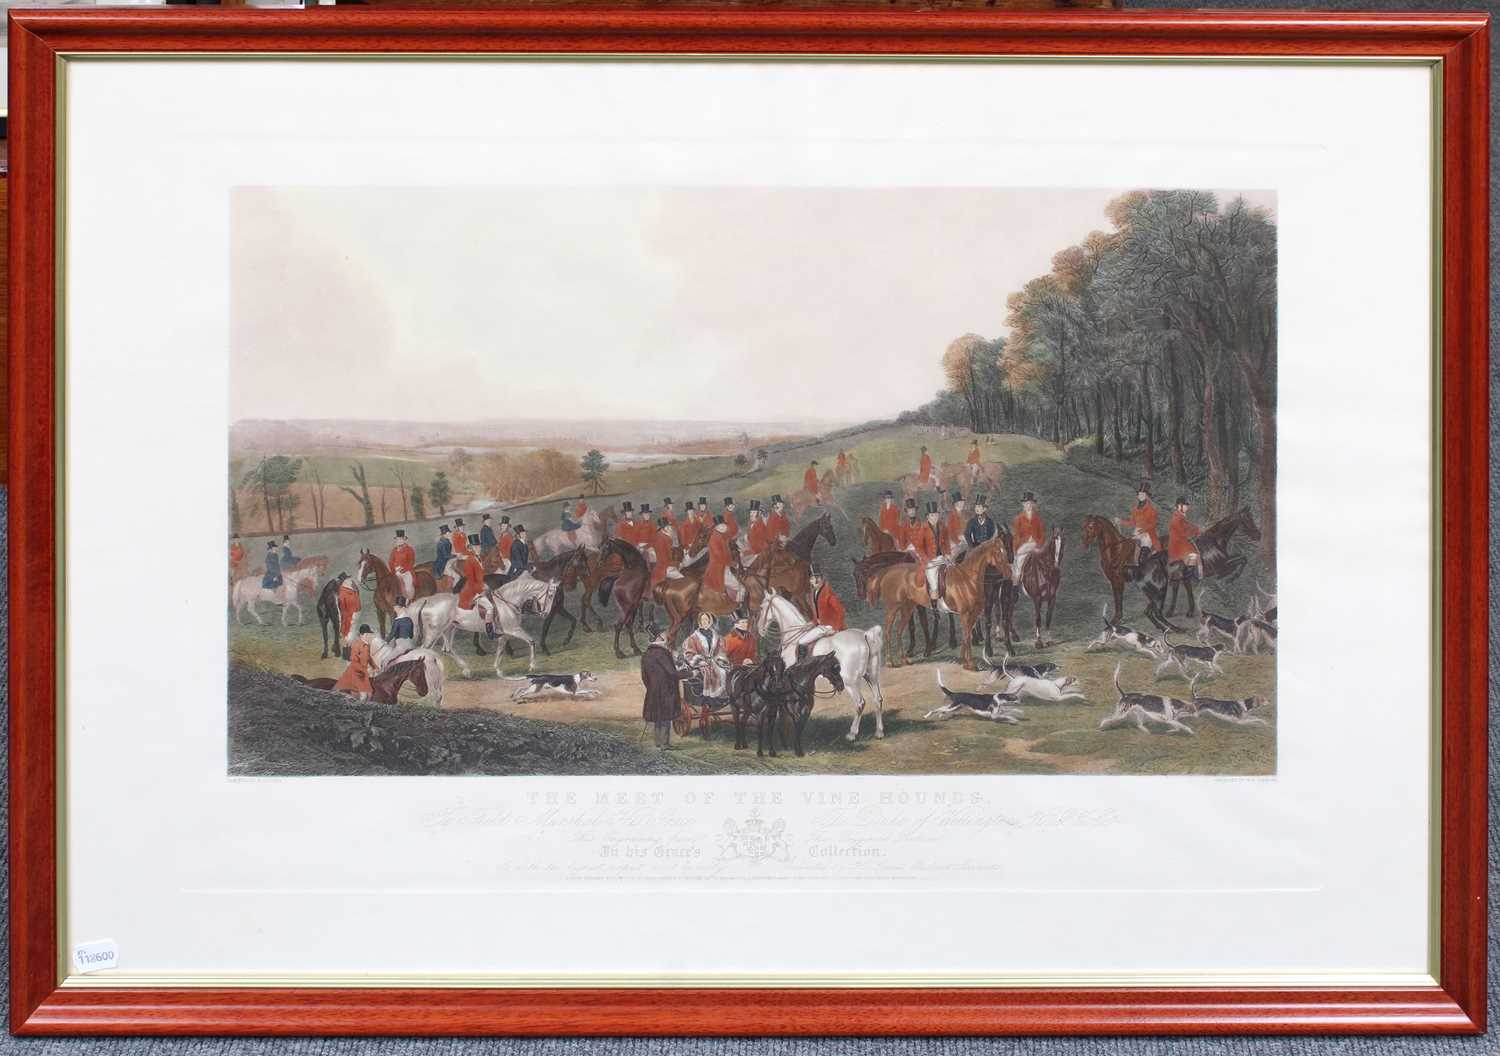 W.H.Simmons After H.Calvert "The Meet of the Vine Hounds" Colour reproduction; together with a - Image 3 of 3